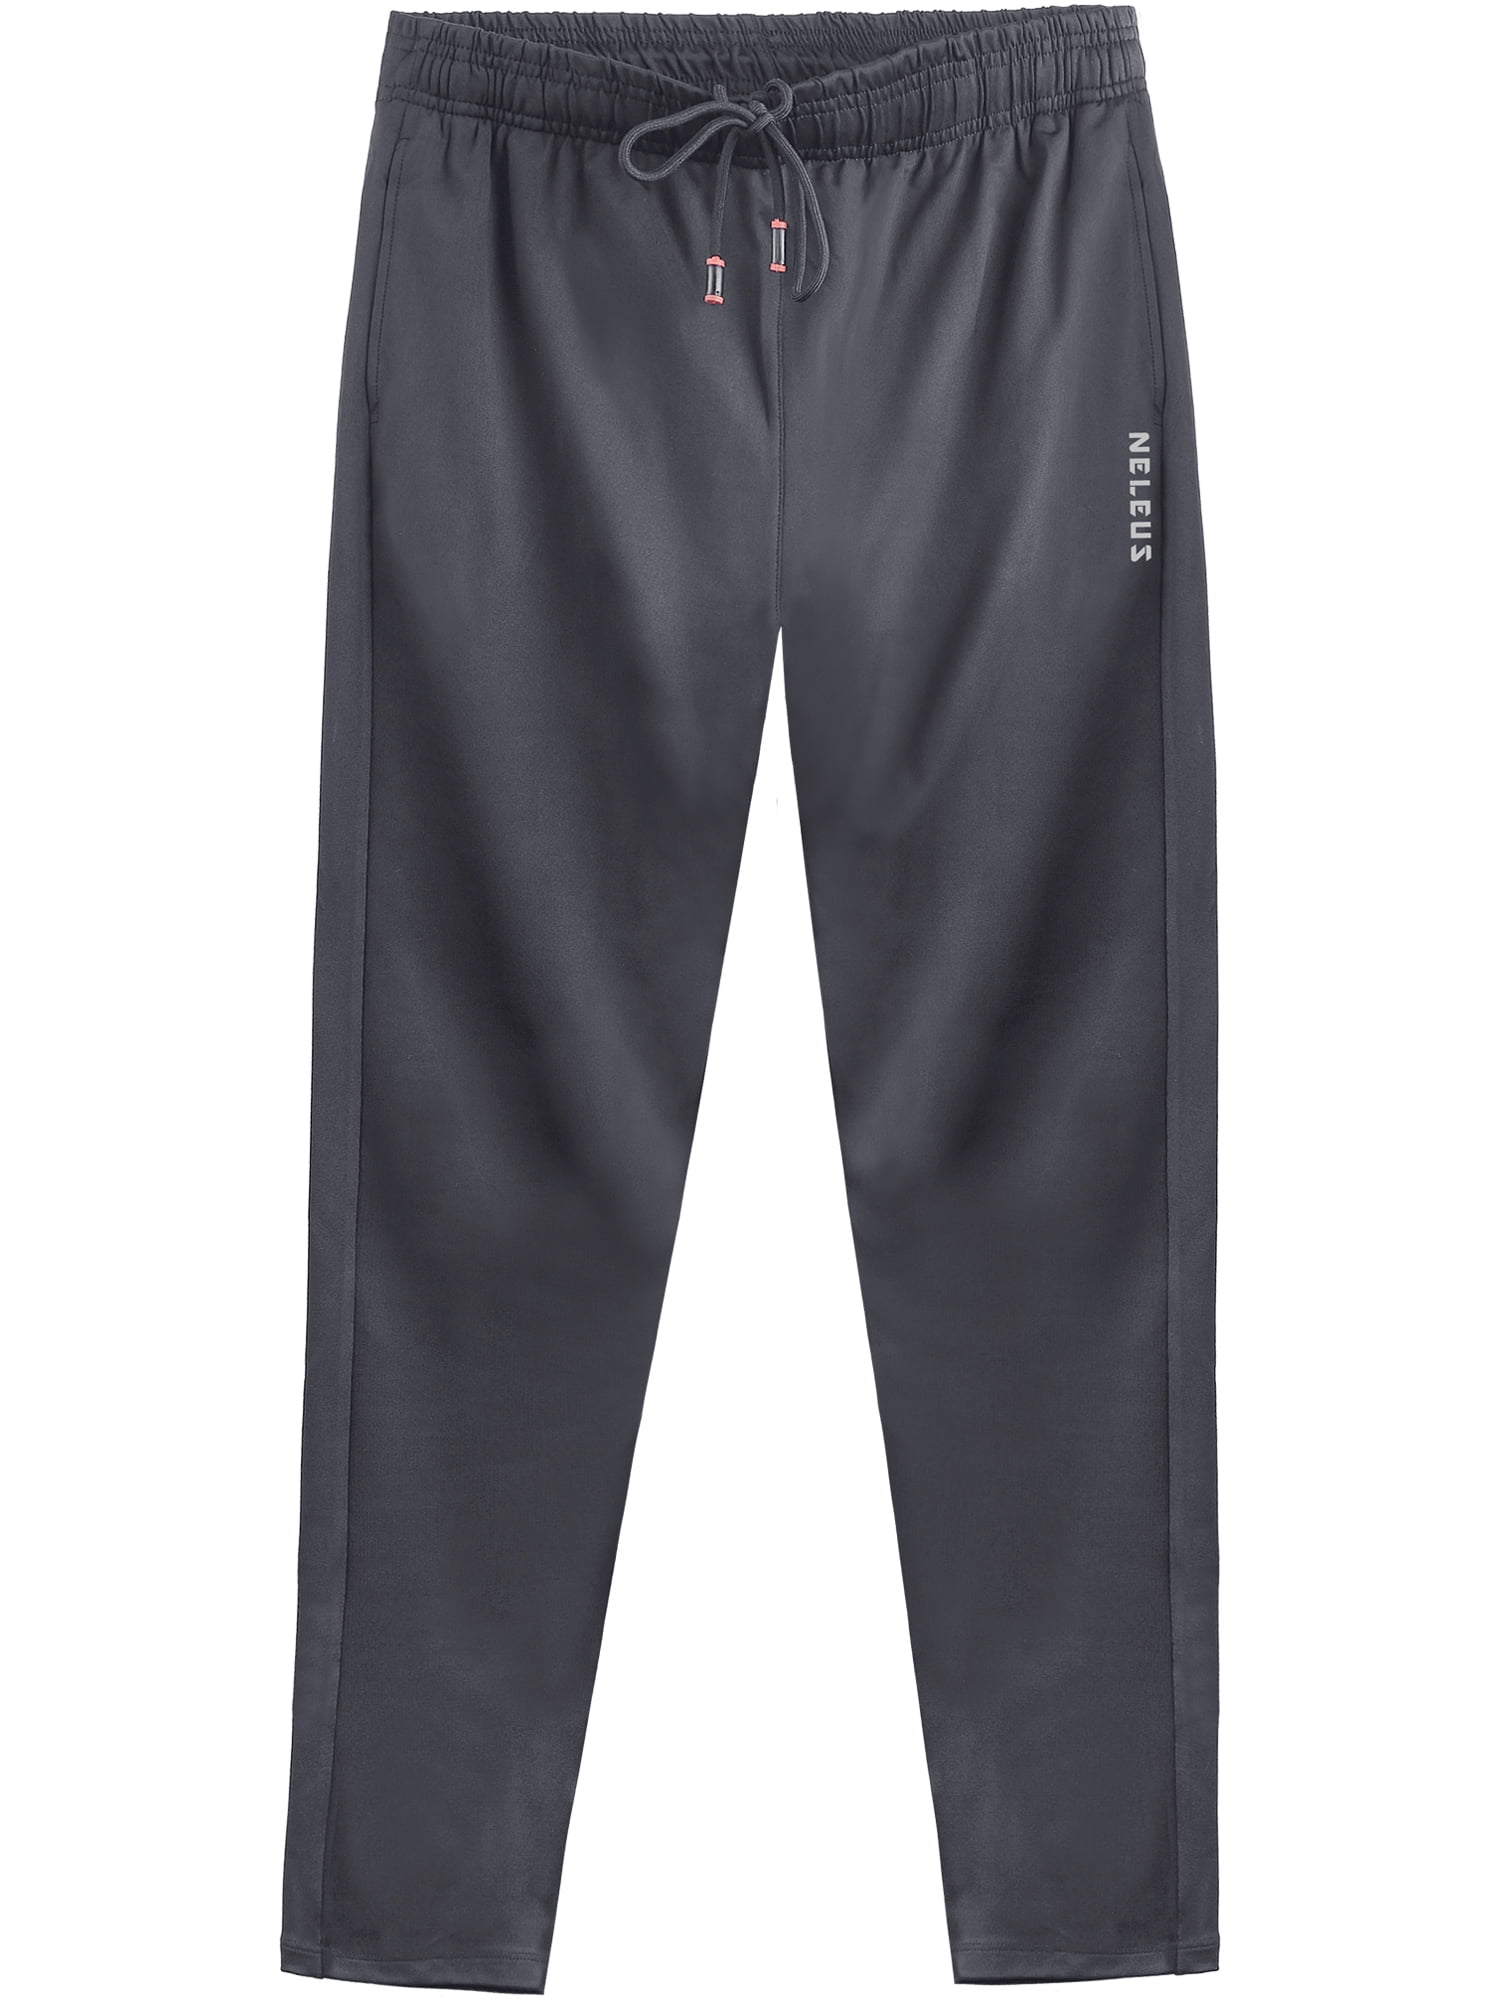 NELEUS Men's Workout Athletic Pants Running Sweatpants With Pockets ...